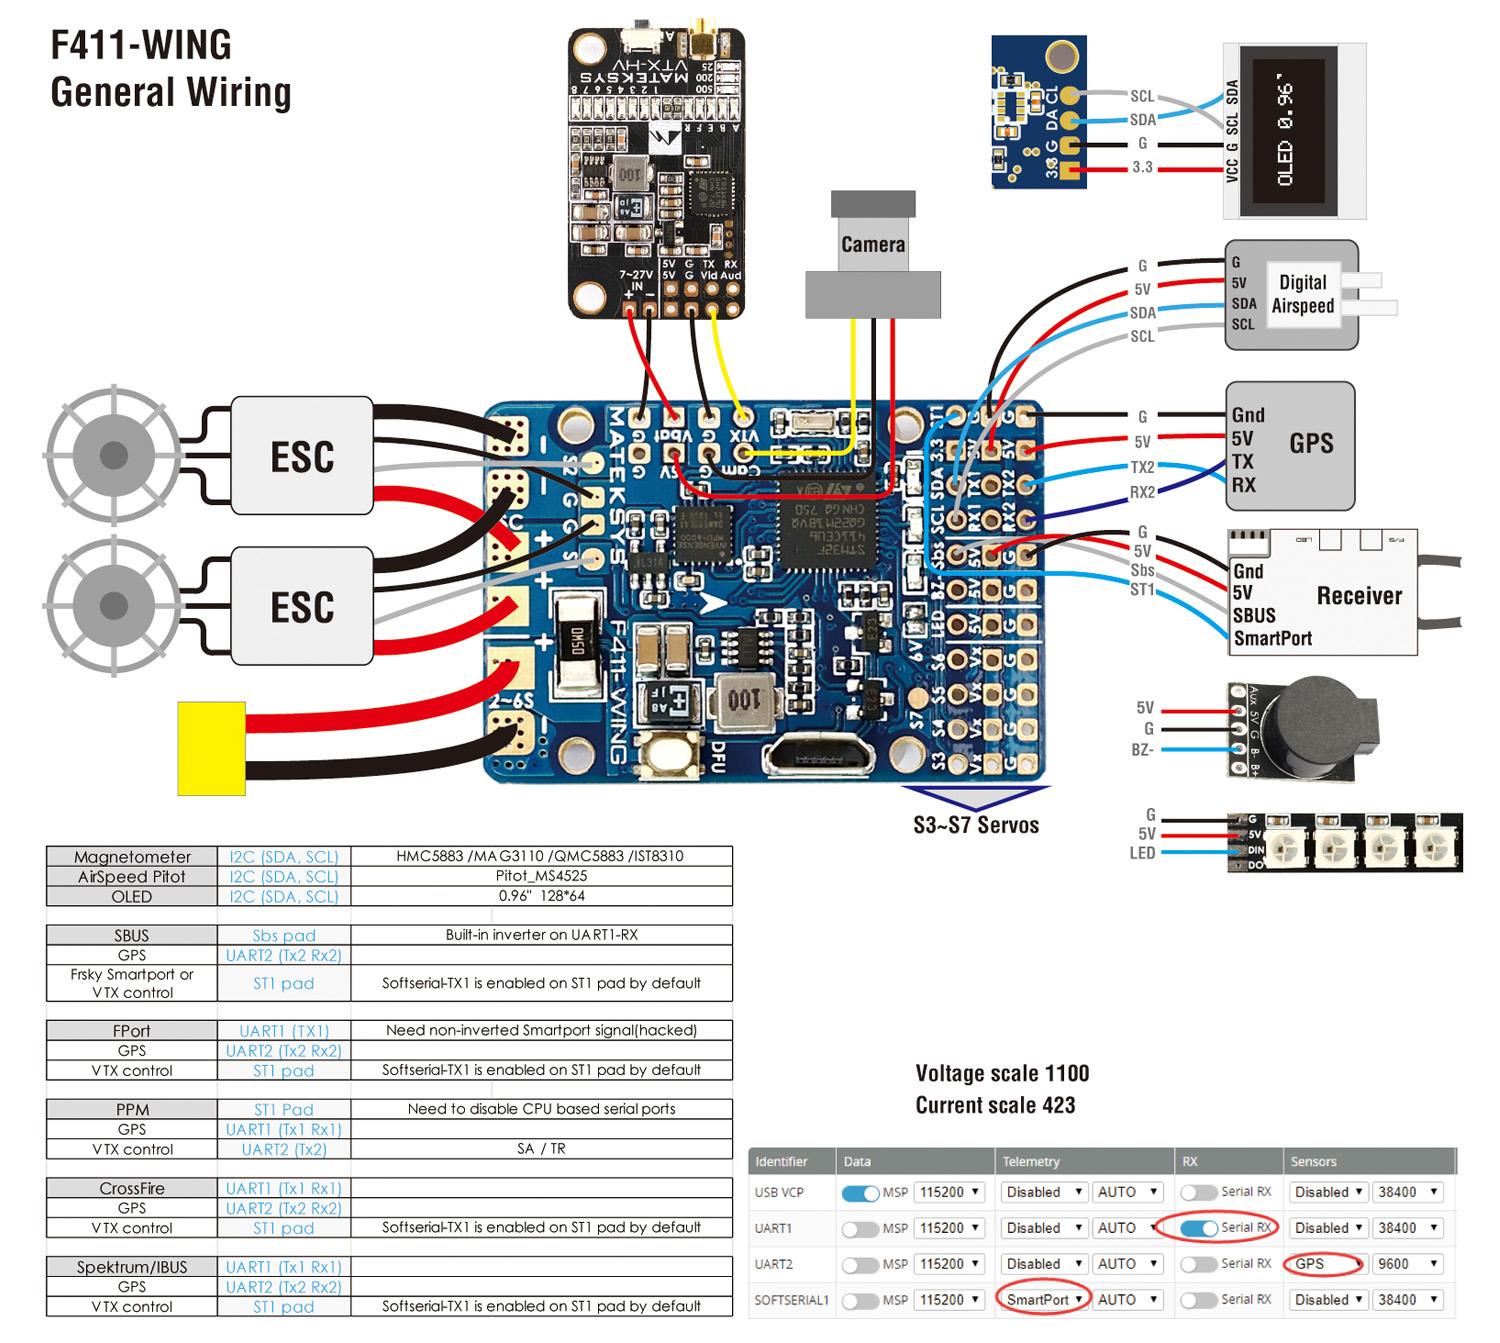 wiring diagram for the F411 Wing